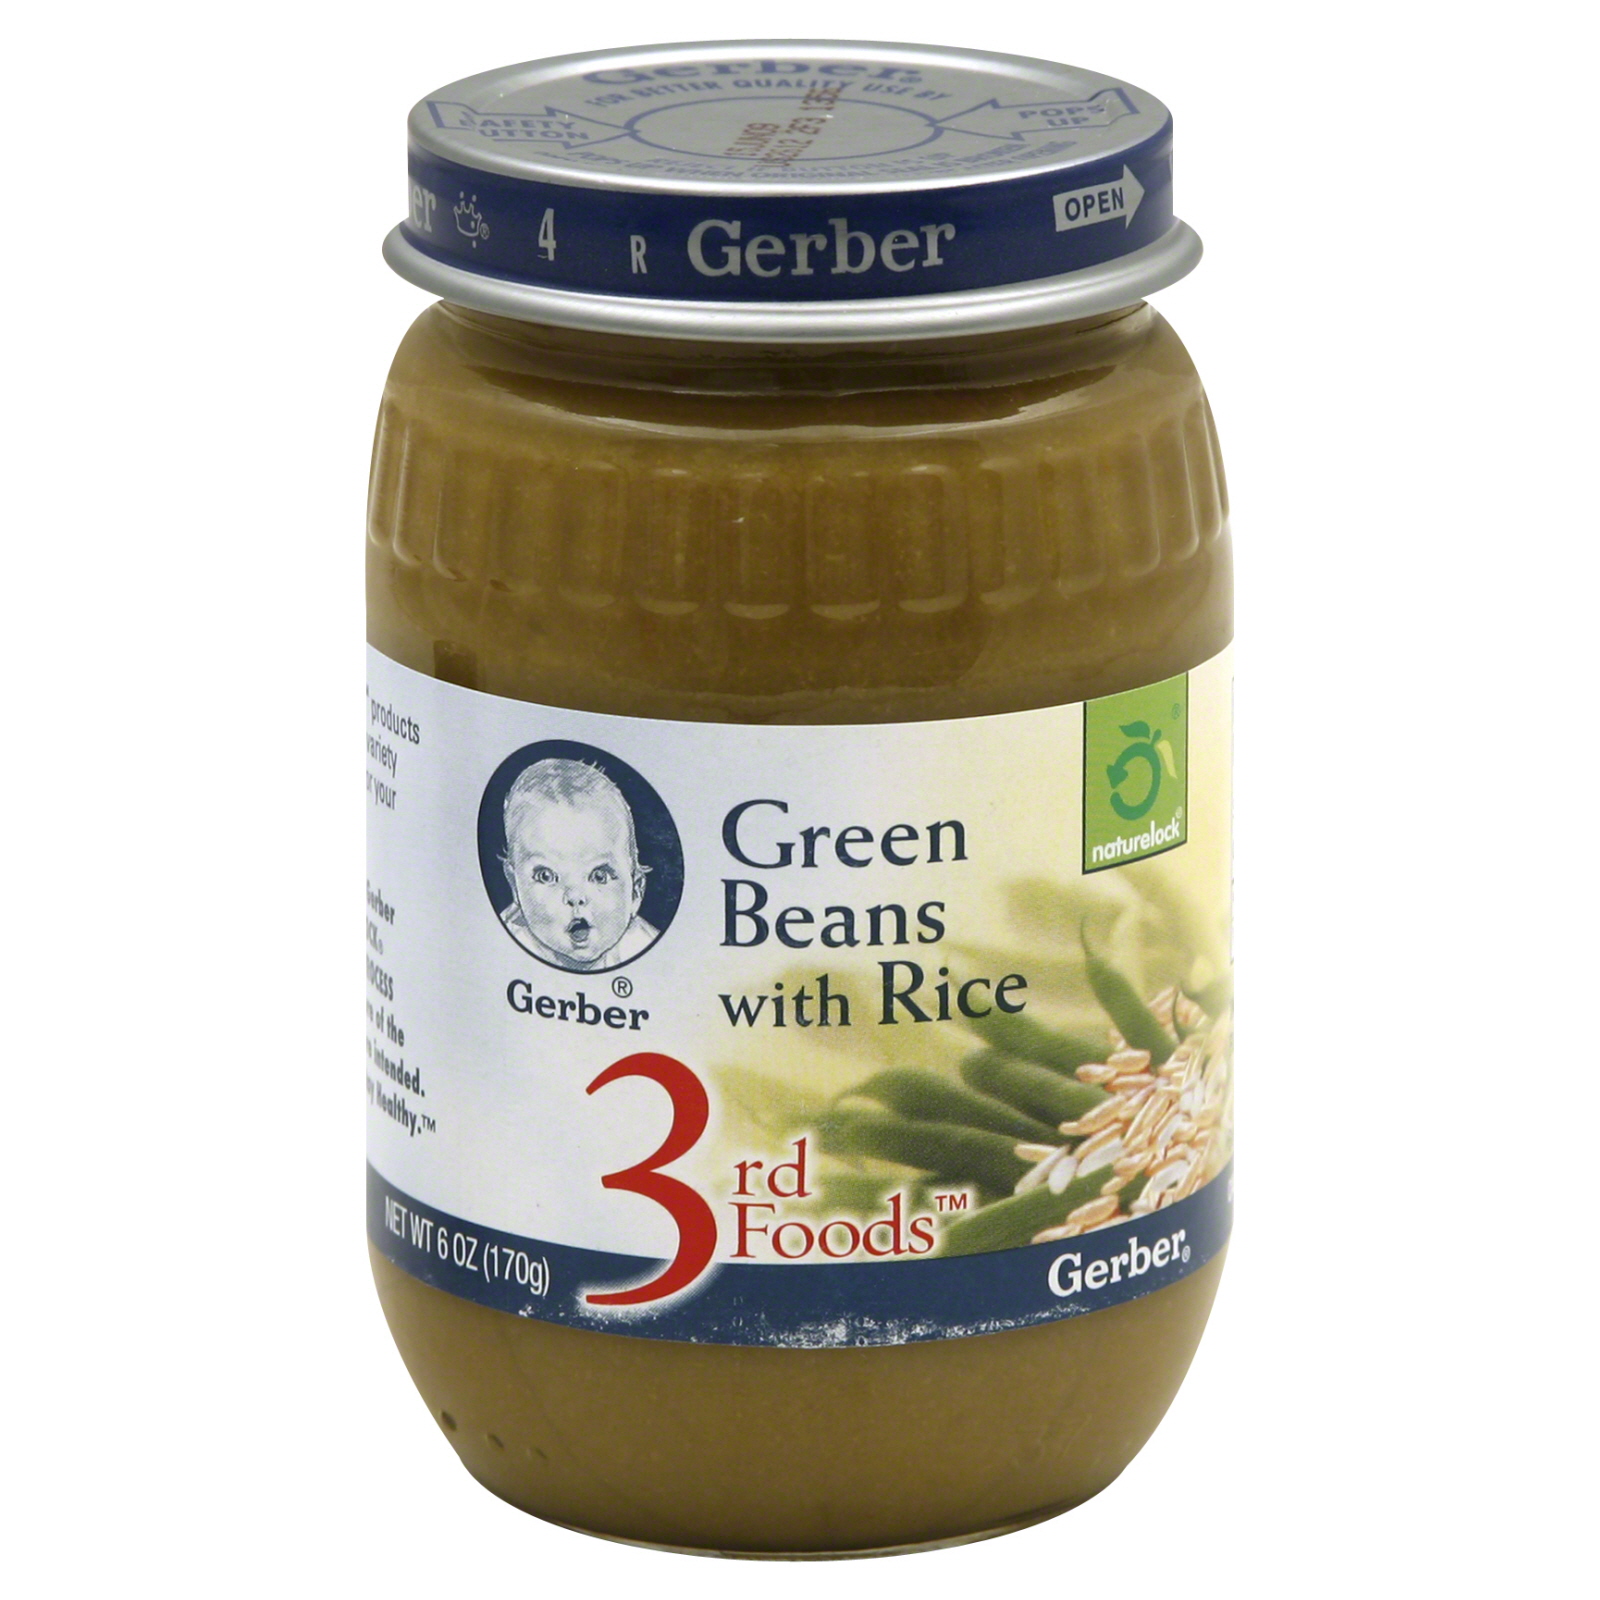 Gerber 3rd Foods Green Beans with Rice, 6 oz (170 g)